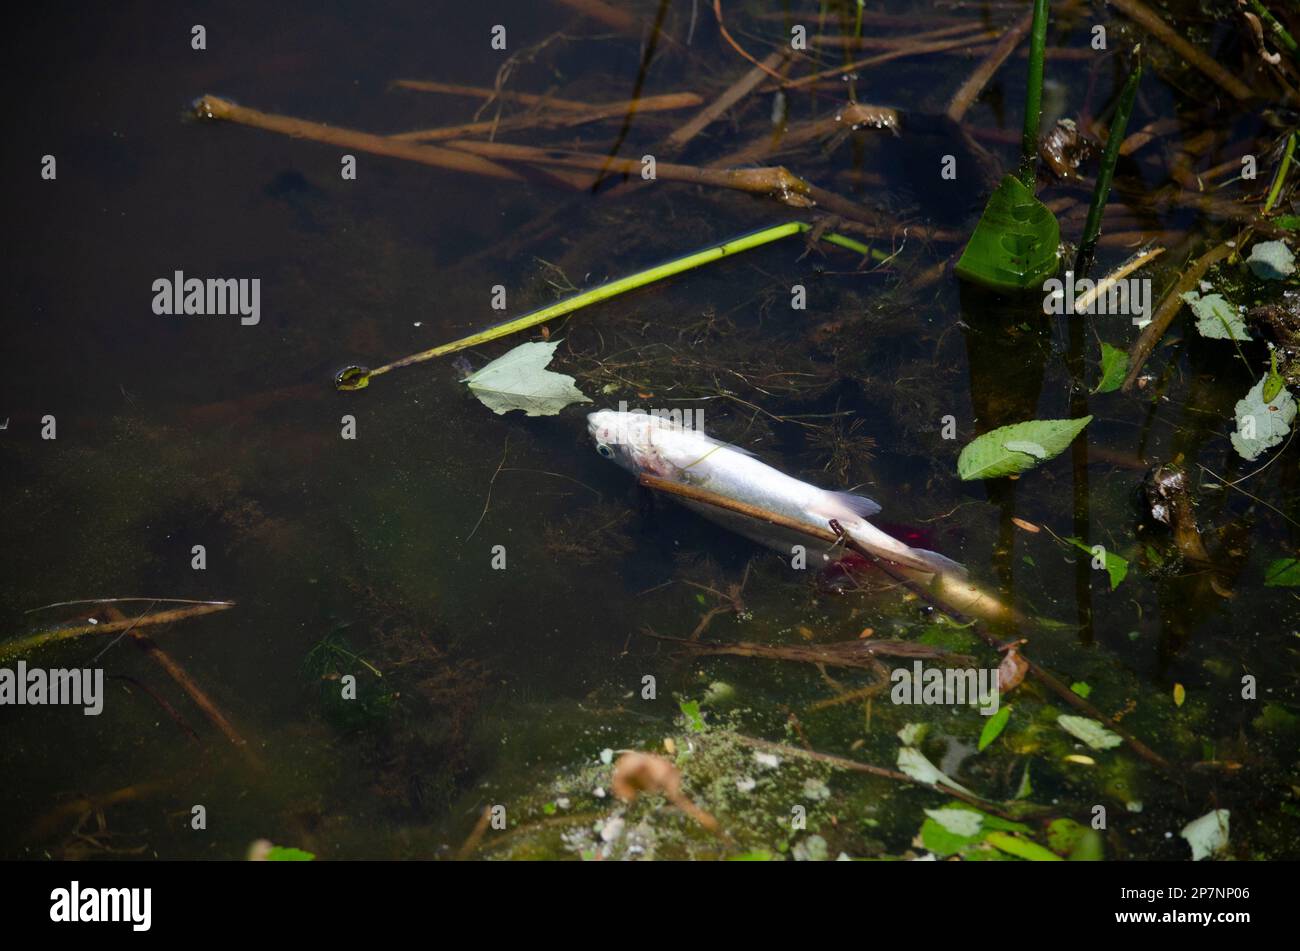 Dead fish floating in a pond Stock Photo